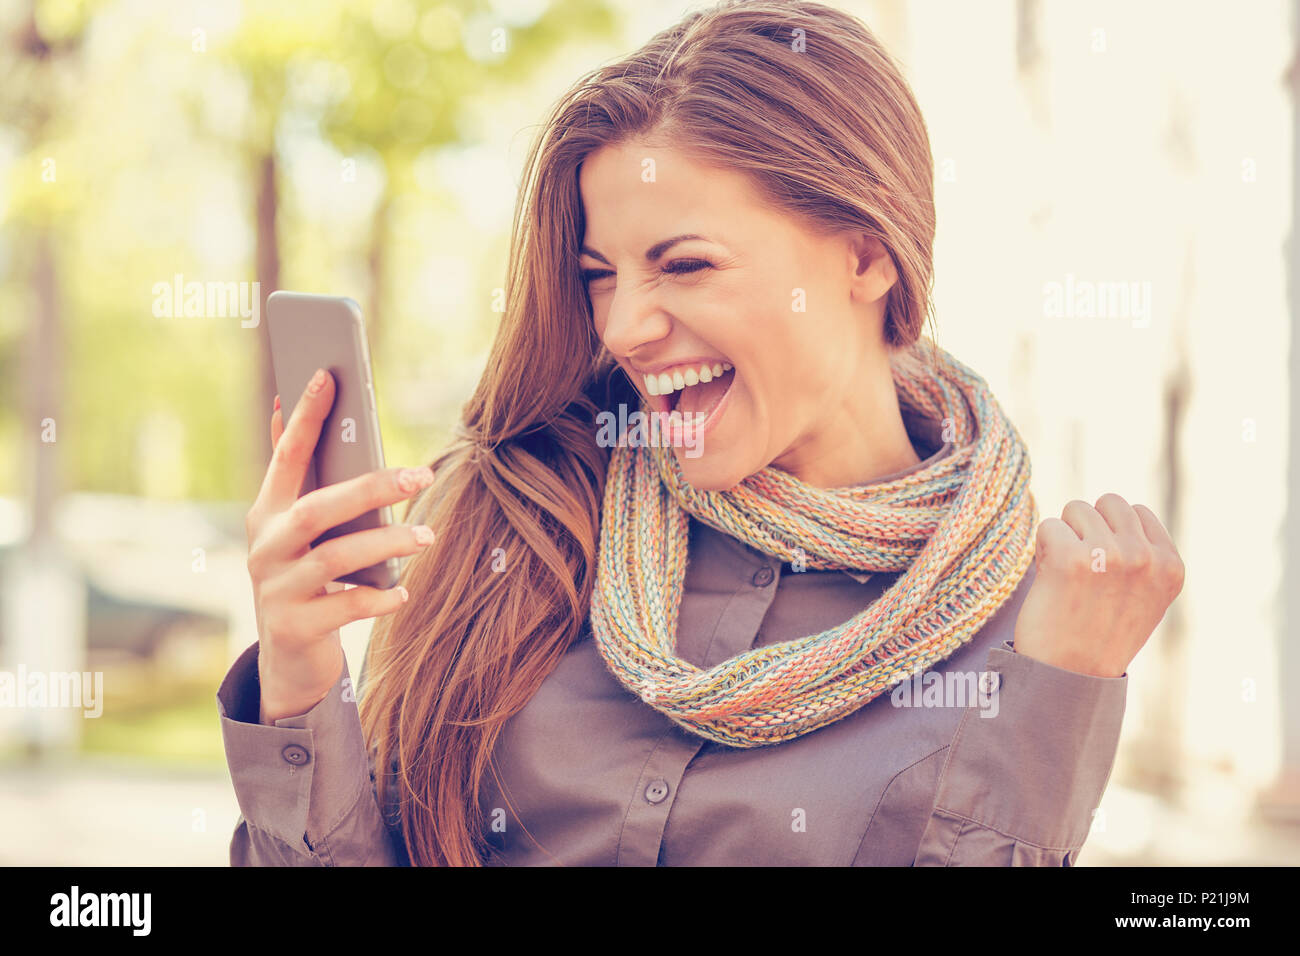 Excited student reading good news on mobile phone outdoors on a warm autumn day with sunlit street background Stock Photo